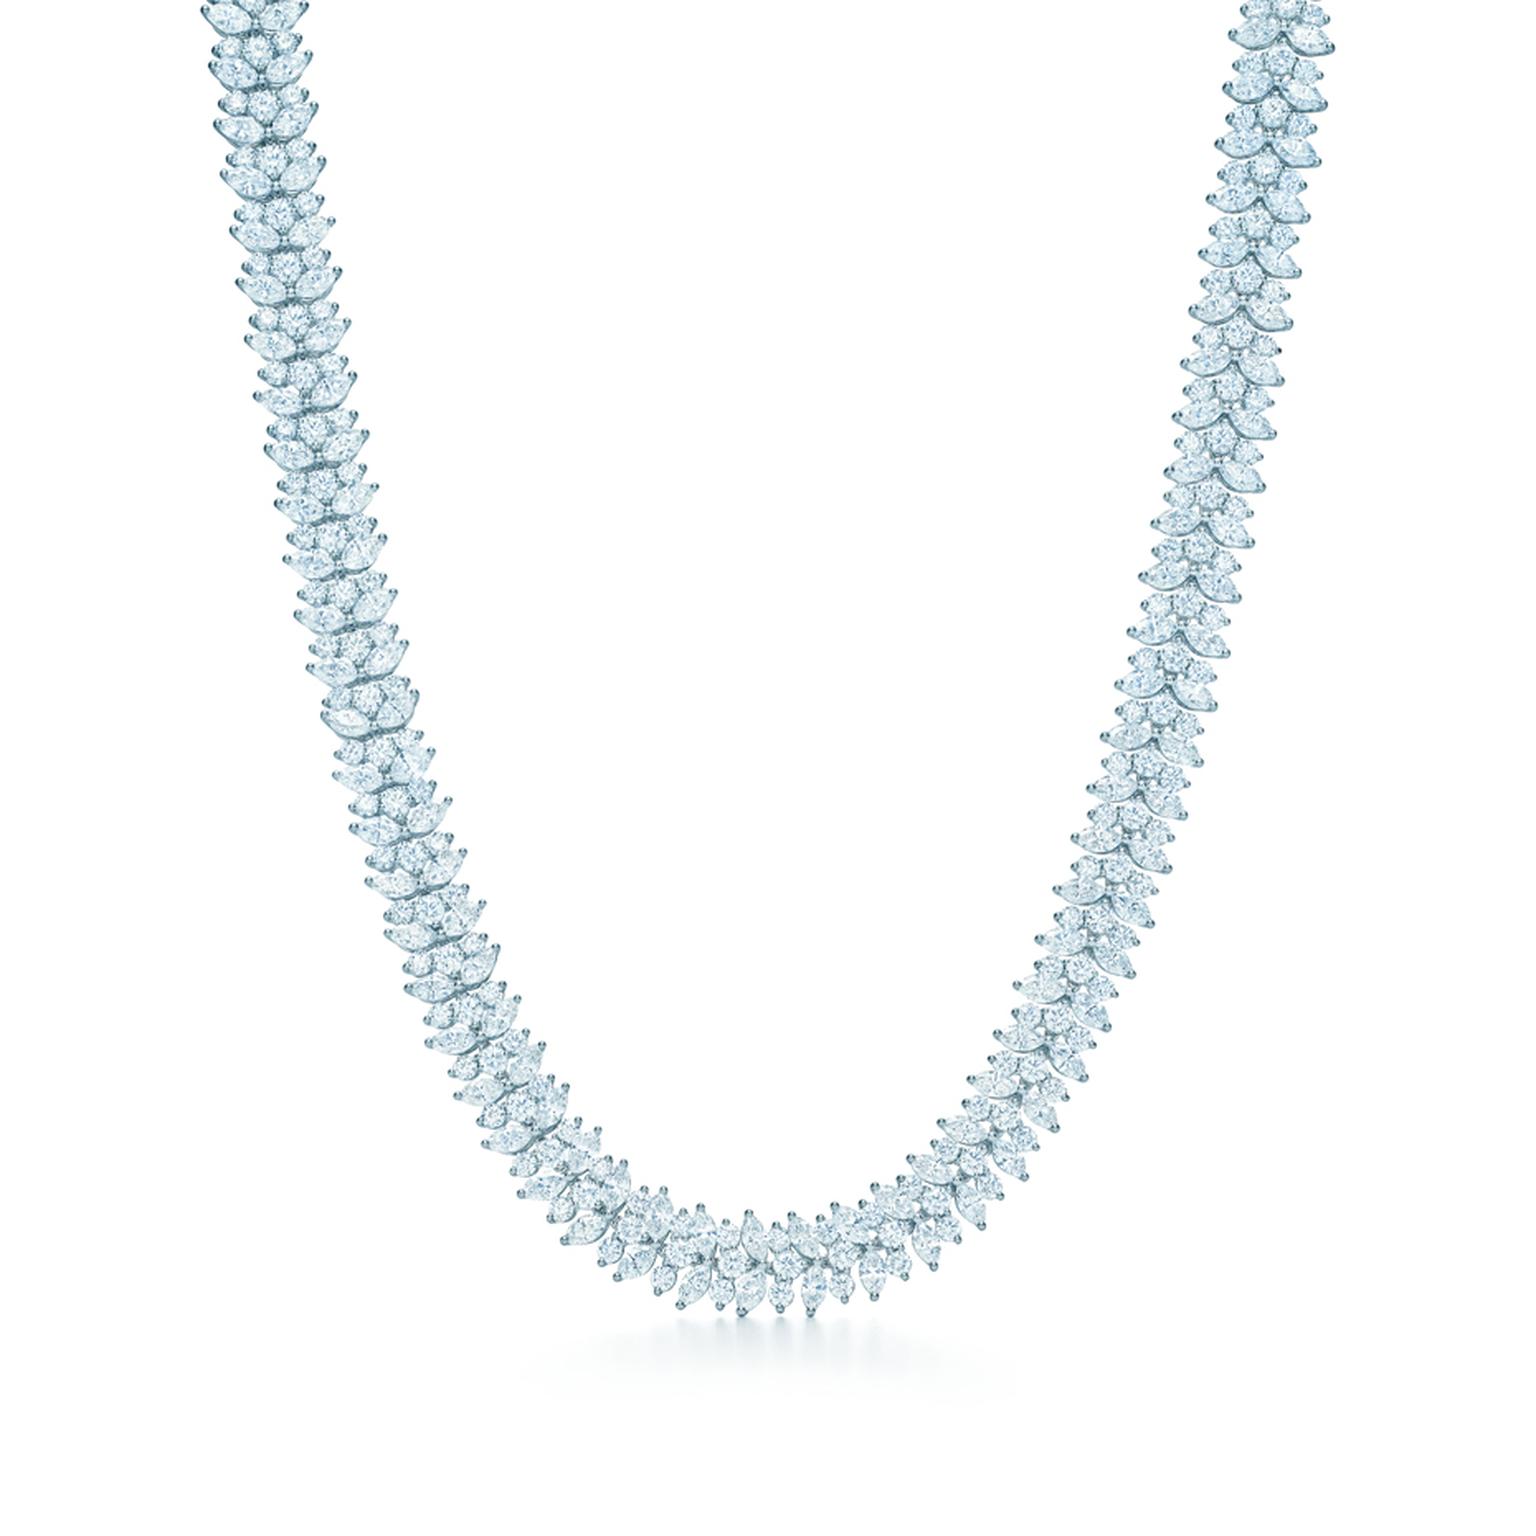 The Tiffany & Co. diamond cluster necklace worn by Jessica Biel to the 86th Academy Awards